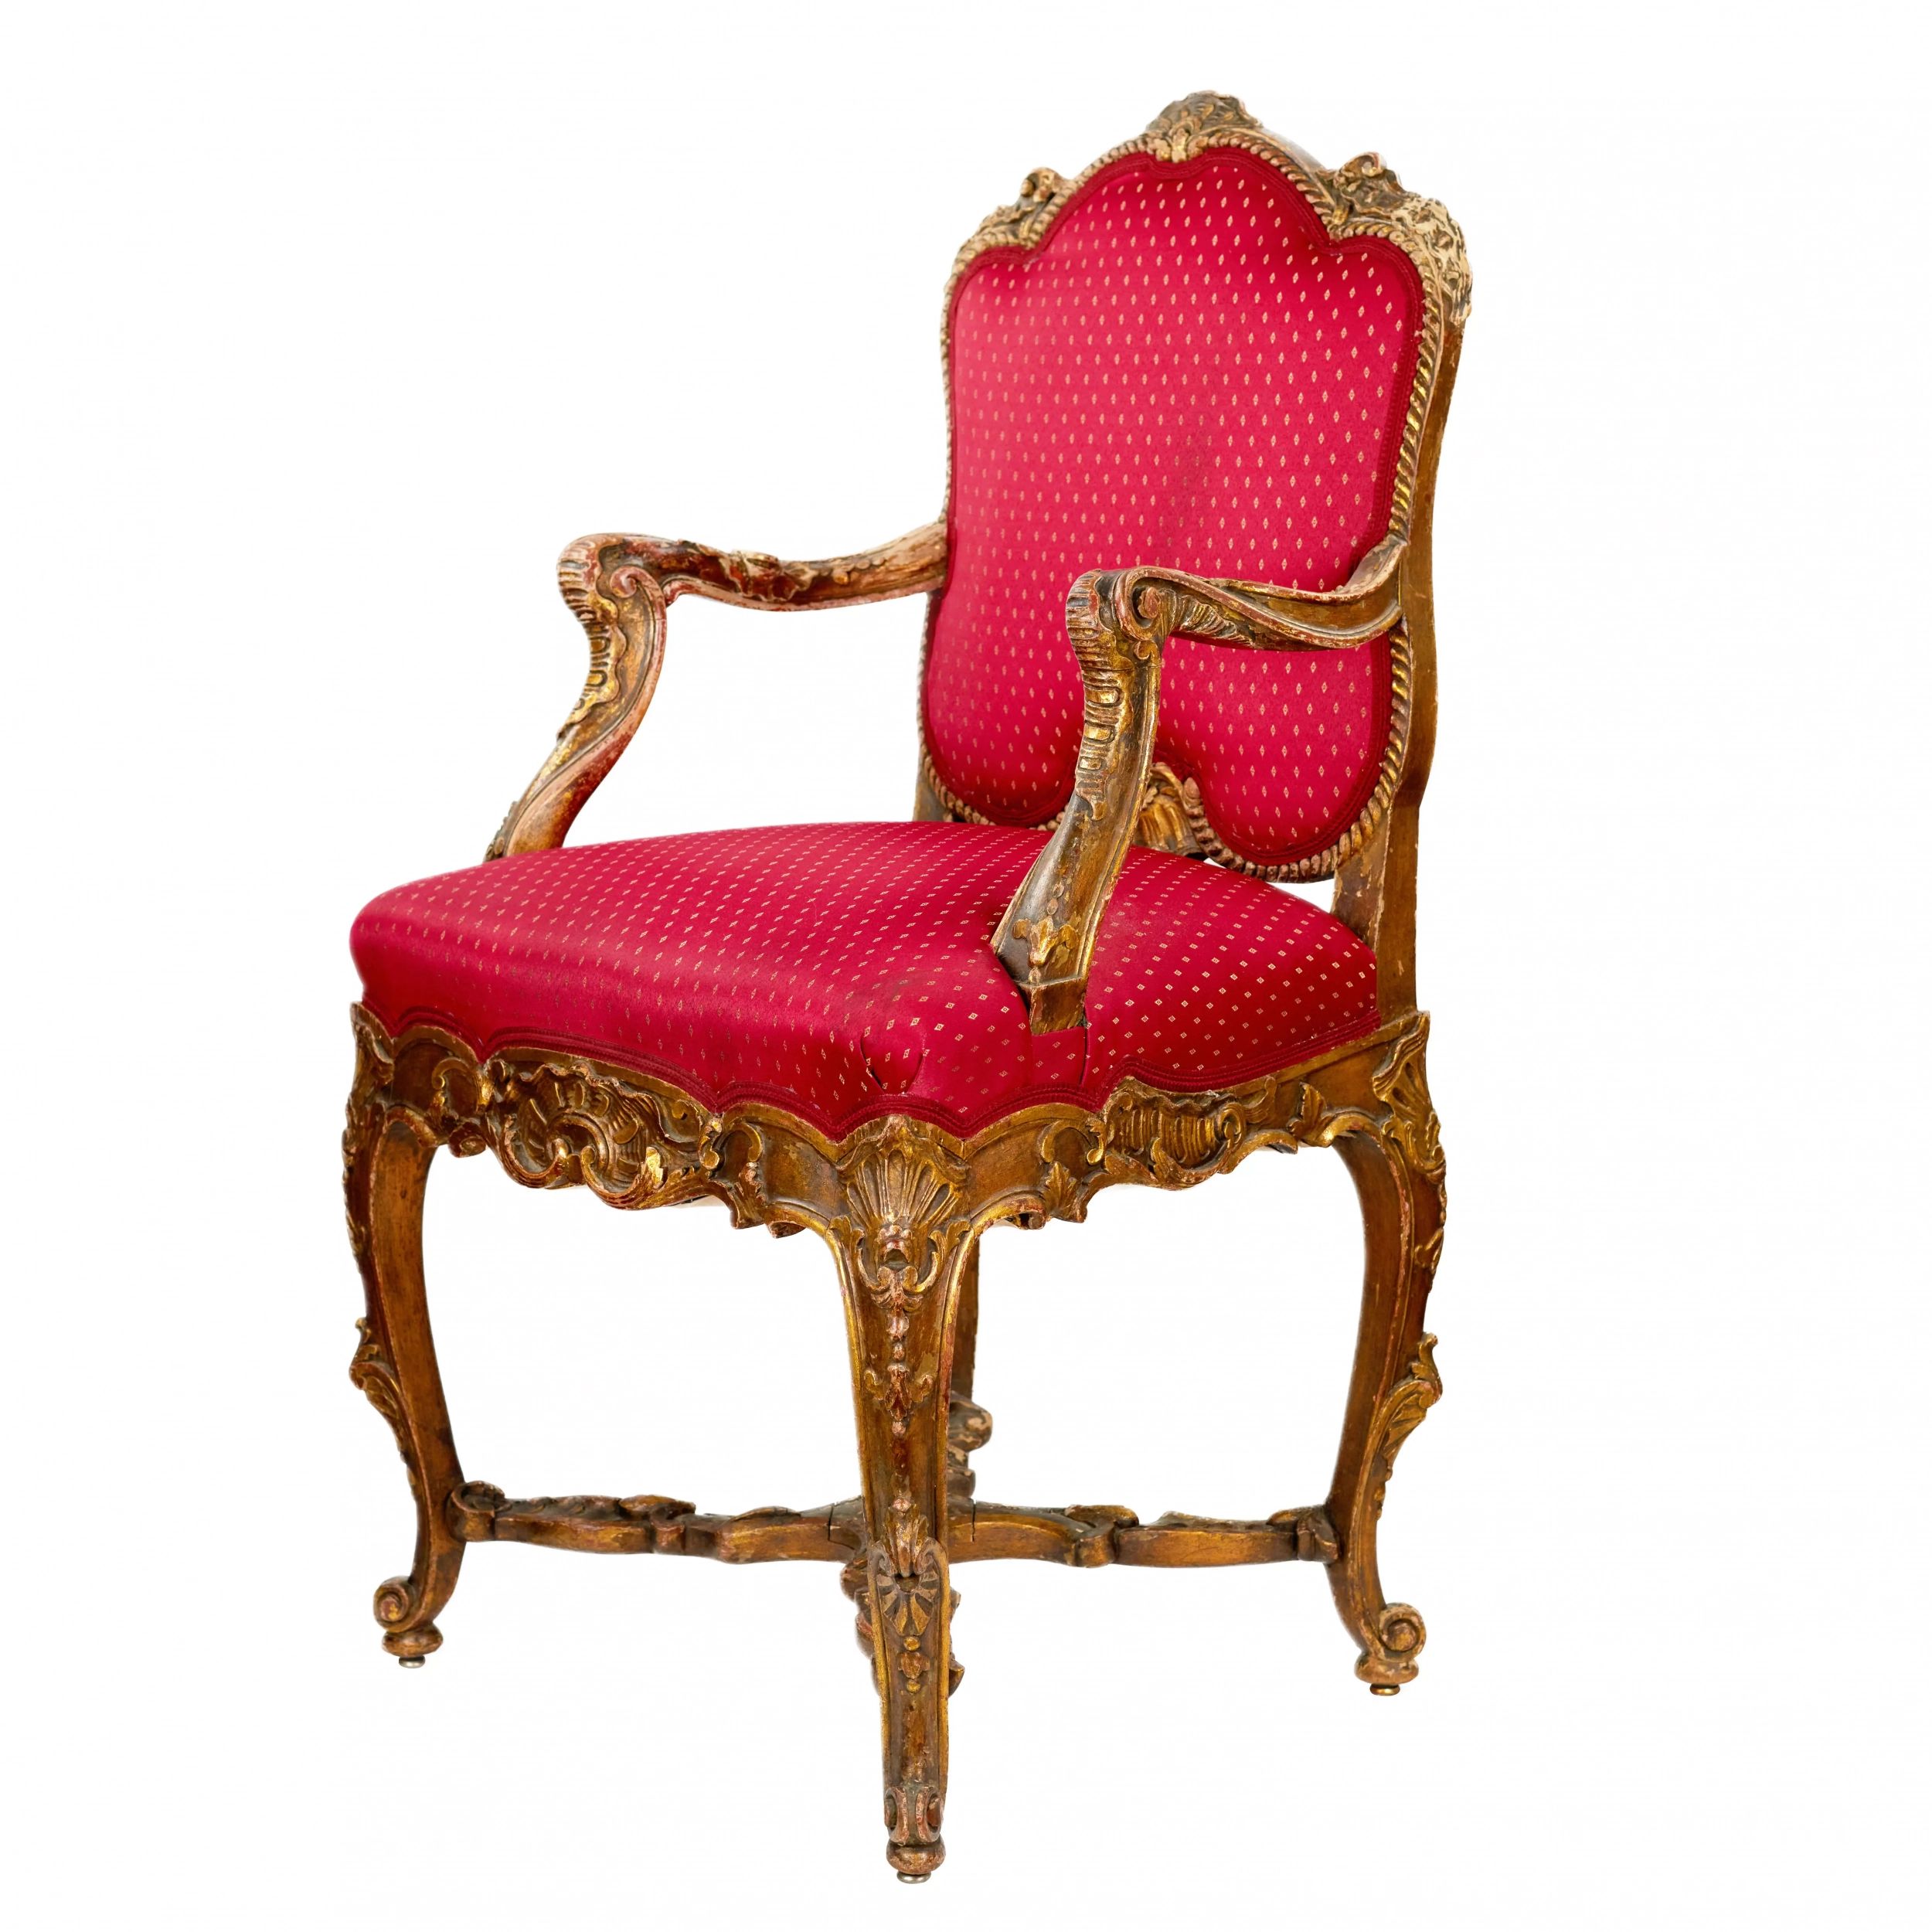 Magnificent-carved-chair-in-the-Rococo-style-of-the-19th-20th-centuries-